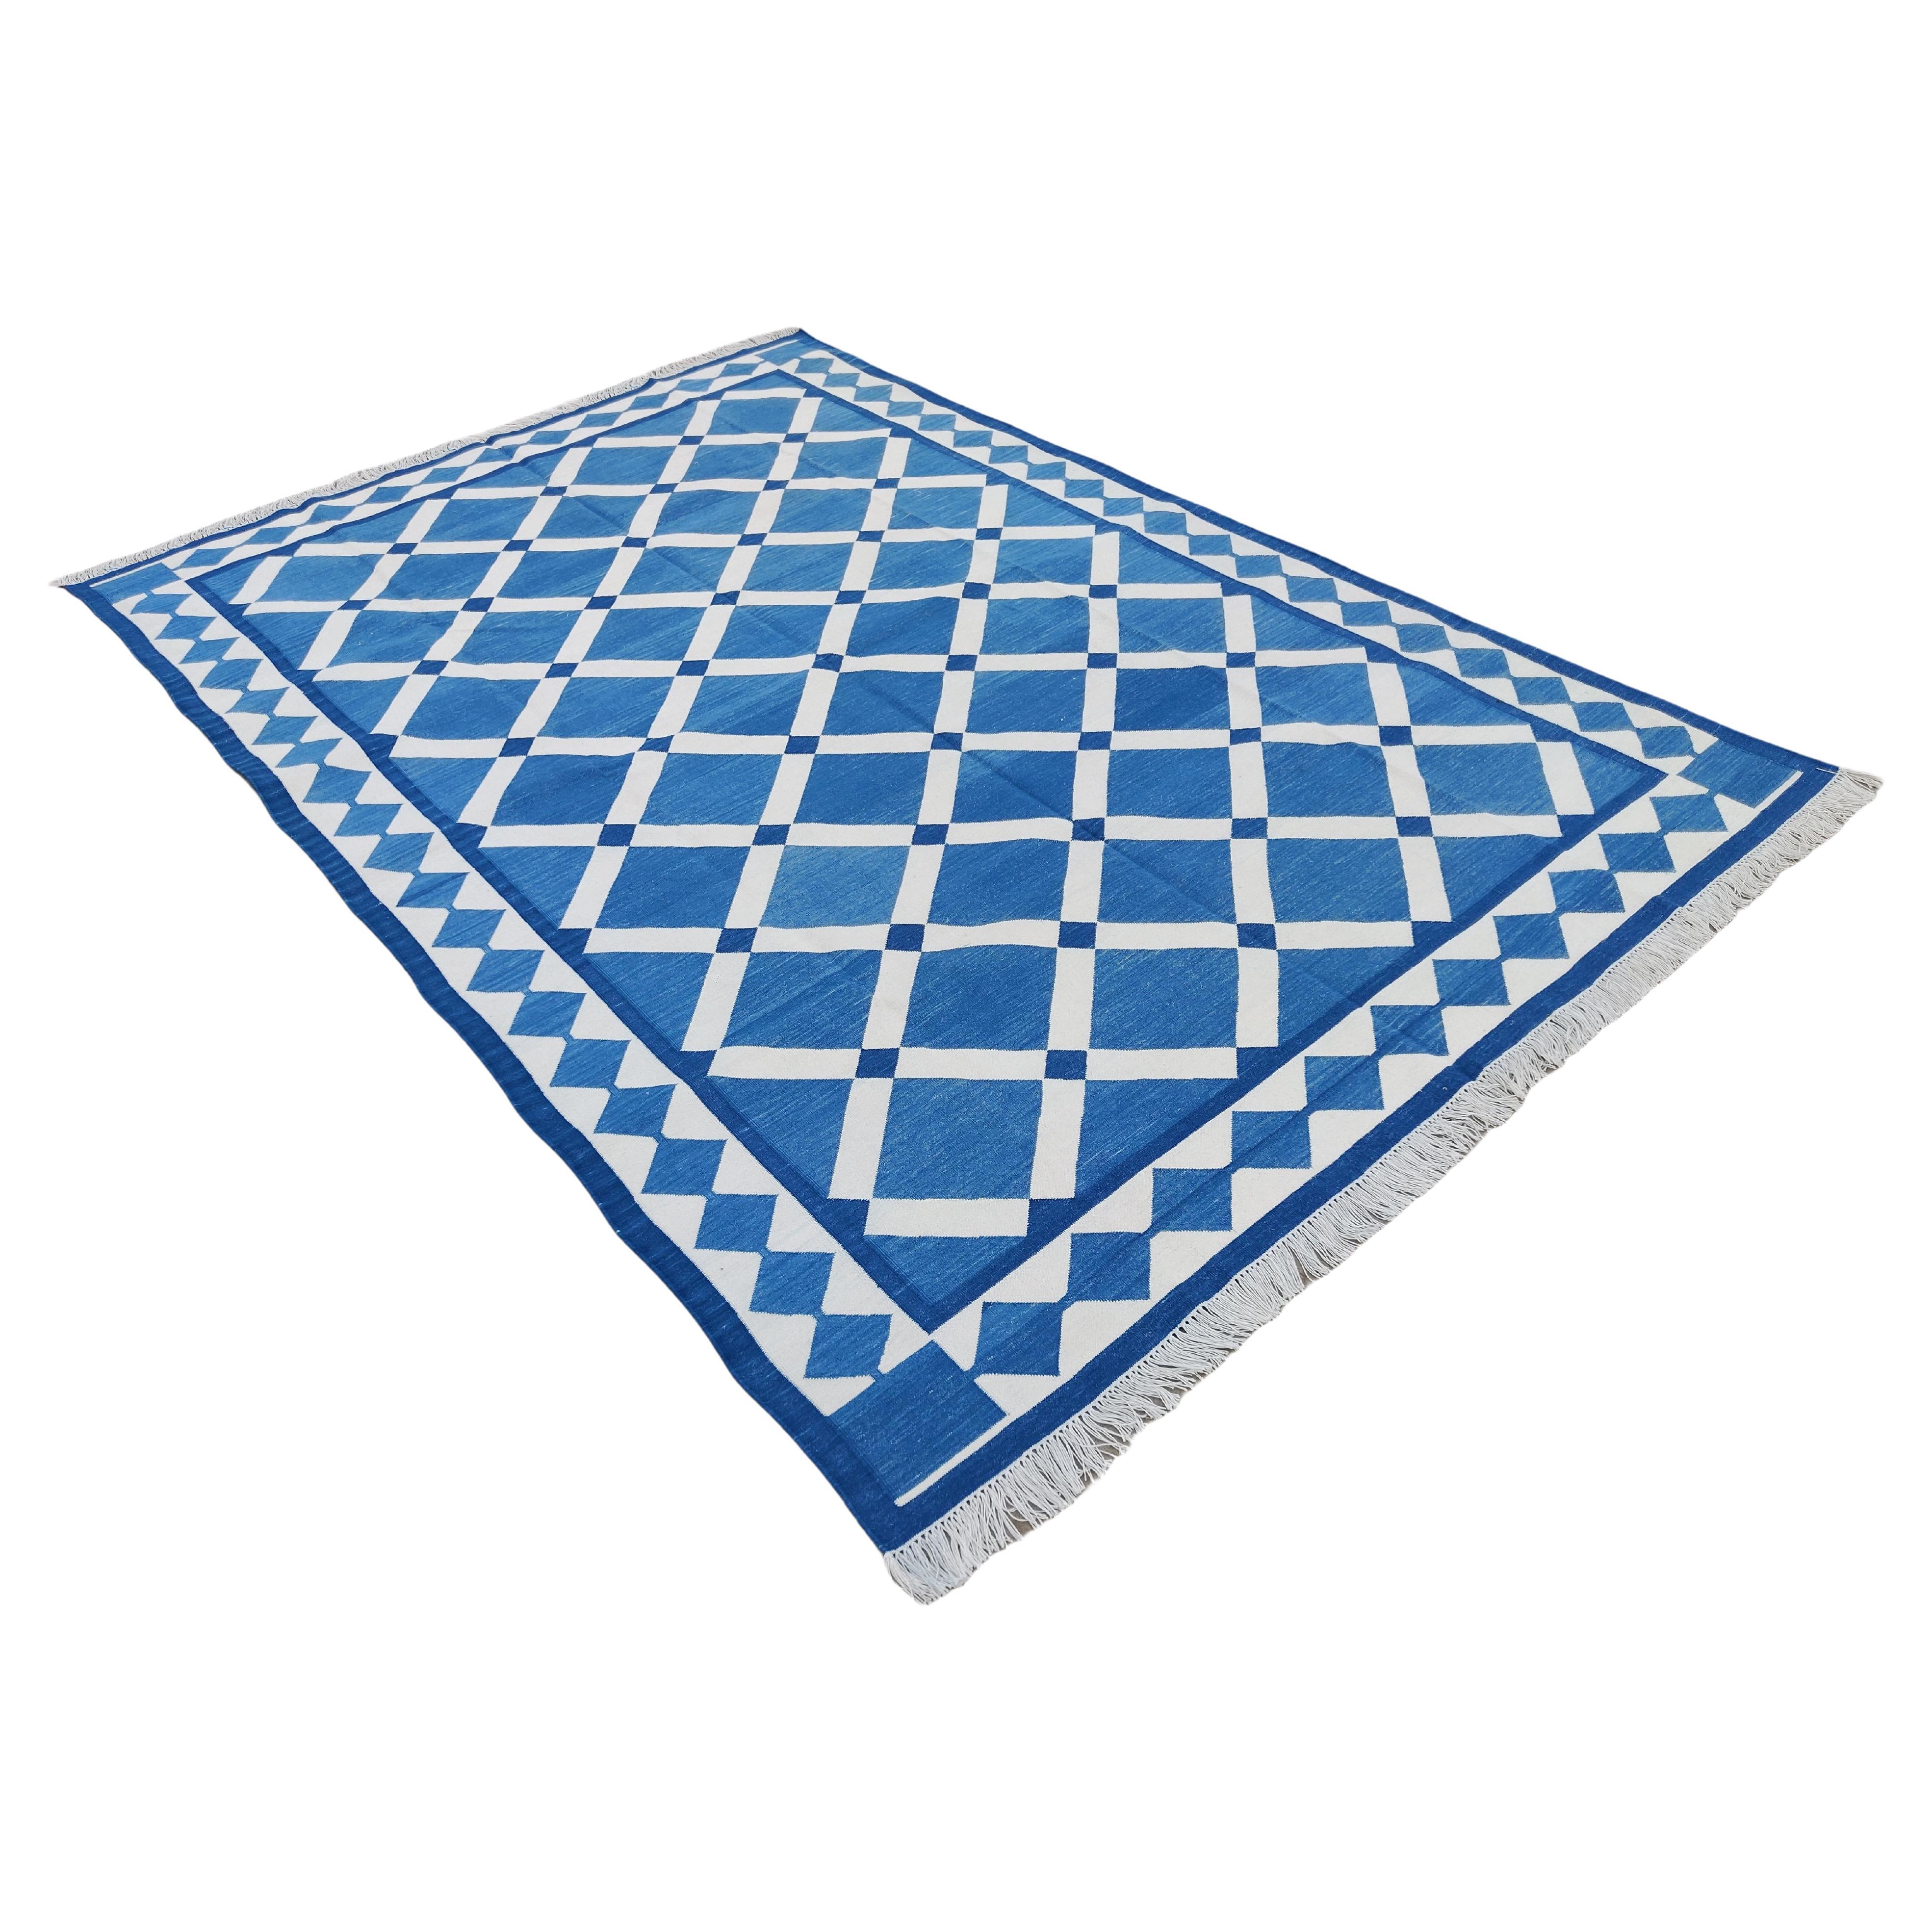 Handmade Cotton Area Flat Weave Rug, Blue And White Geometric Indian Dhurrie Rug For Sale